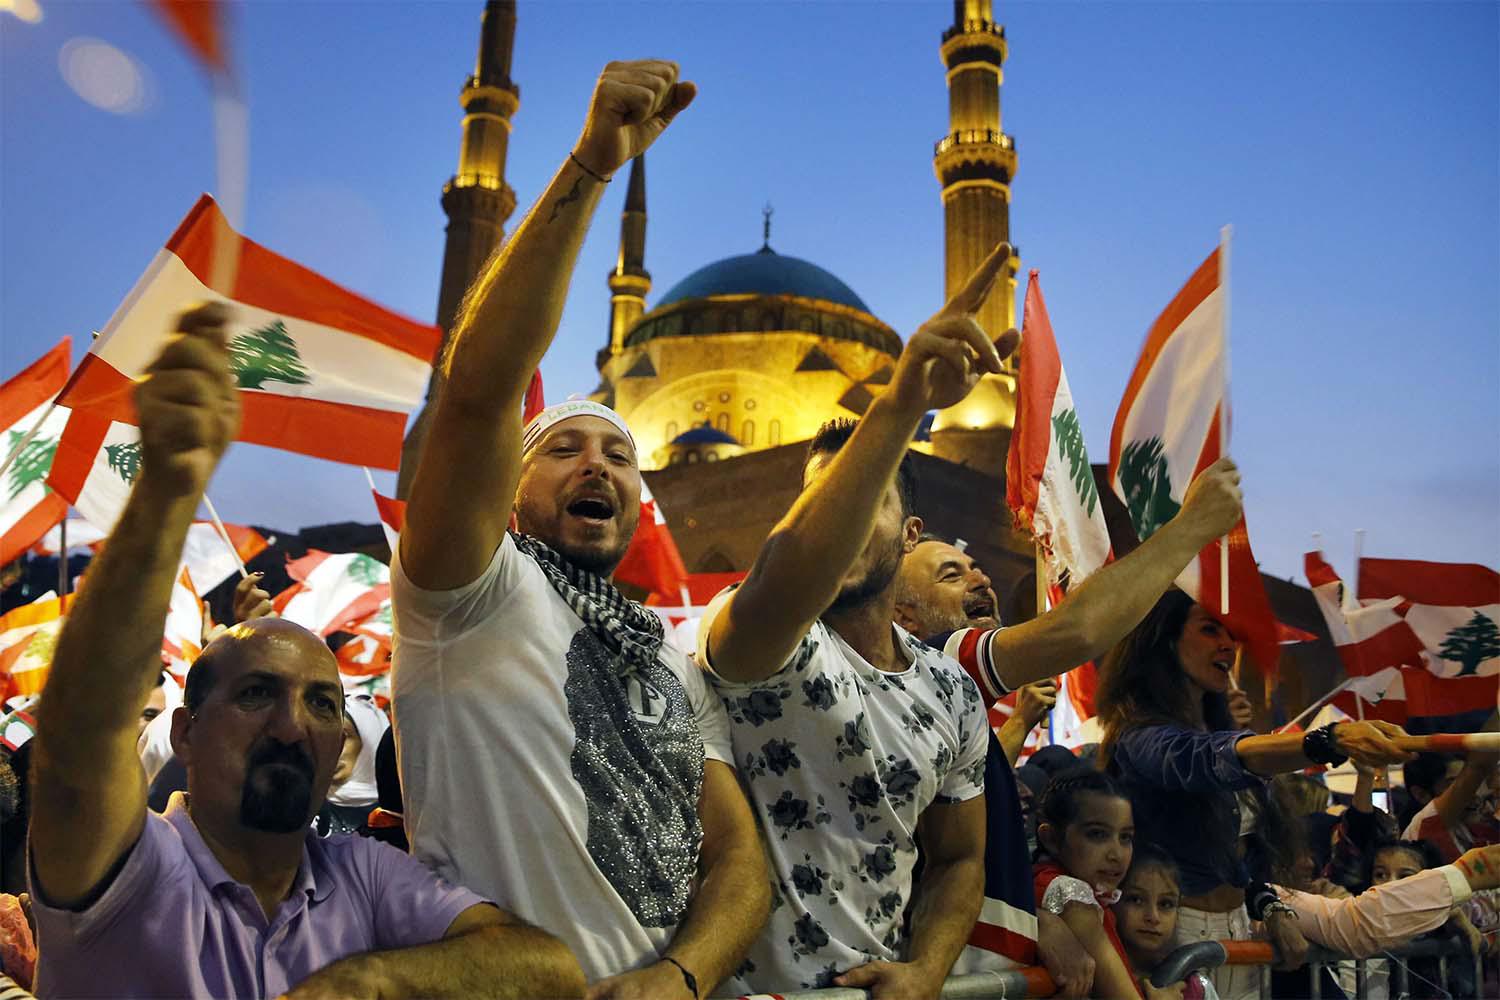 Anti-government protesters wave Lebanese flags and chant slogans, during ongoing demonstrations, in Beirut